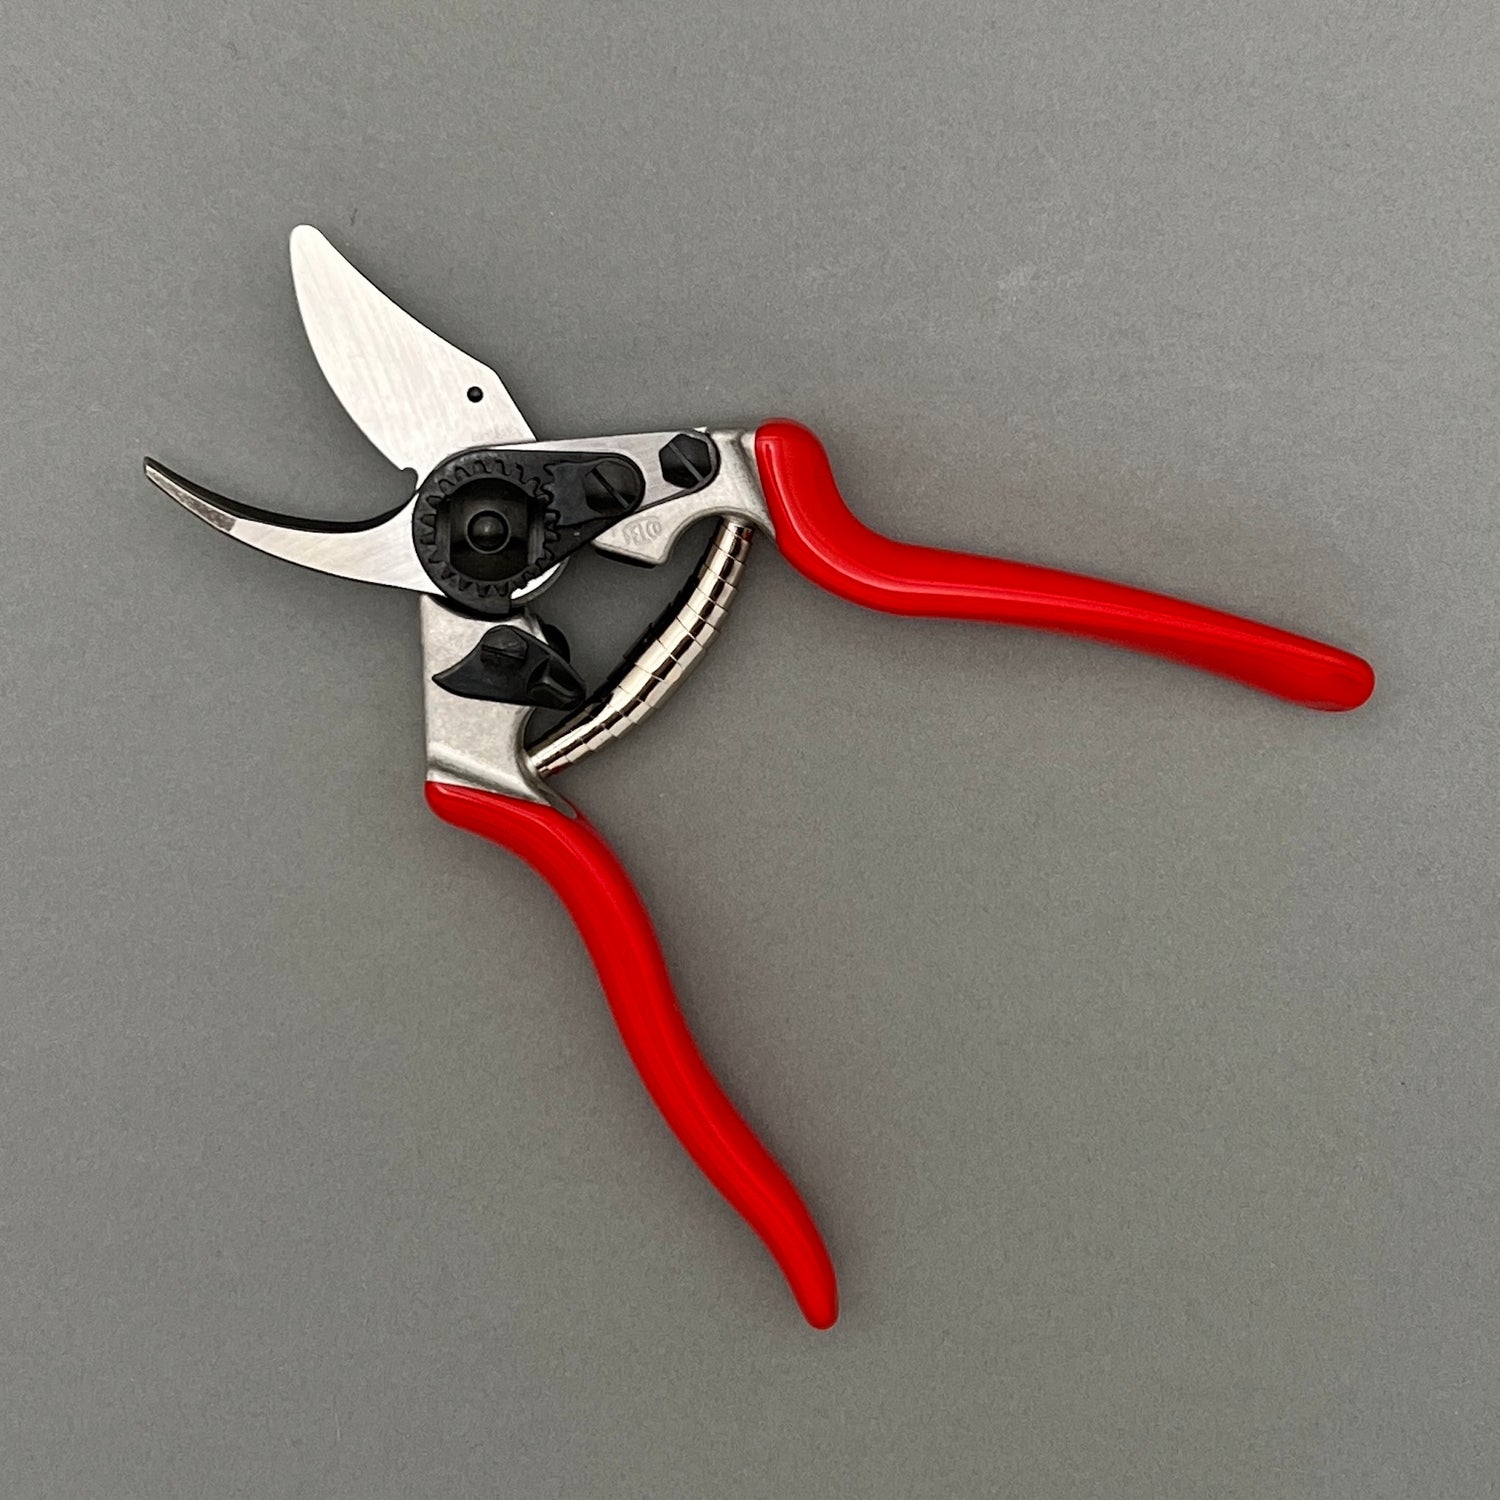 A pair of small steel clippers with a red handle in an opened position laying on a gray background